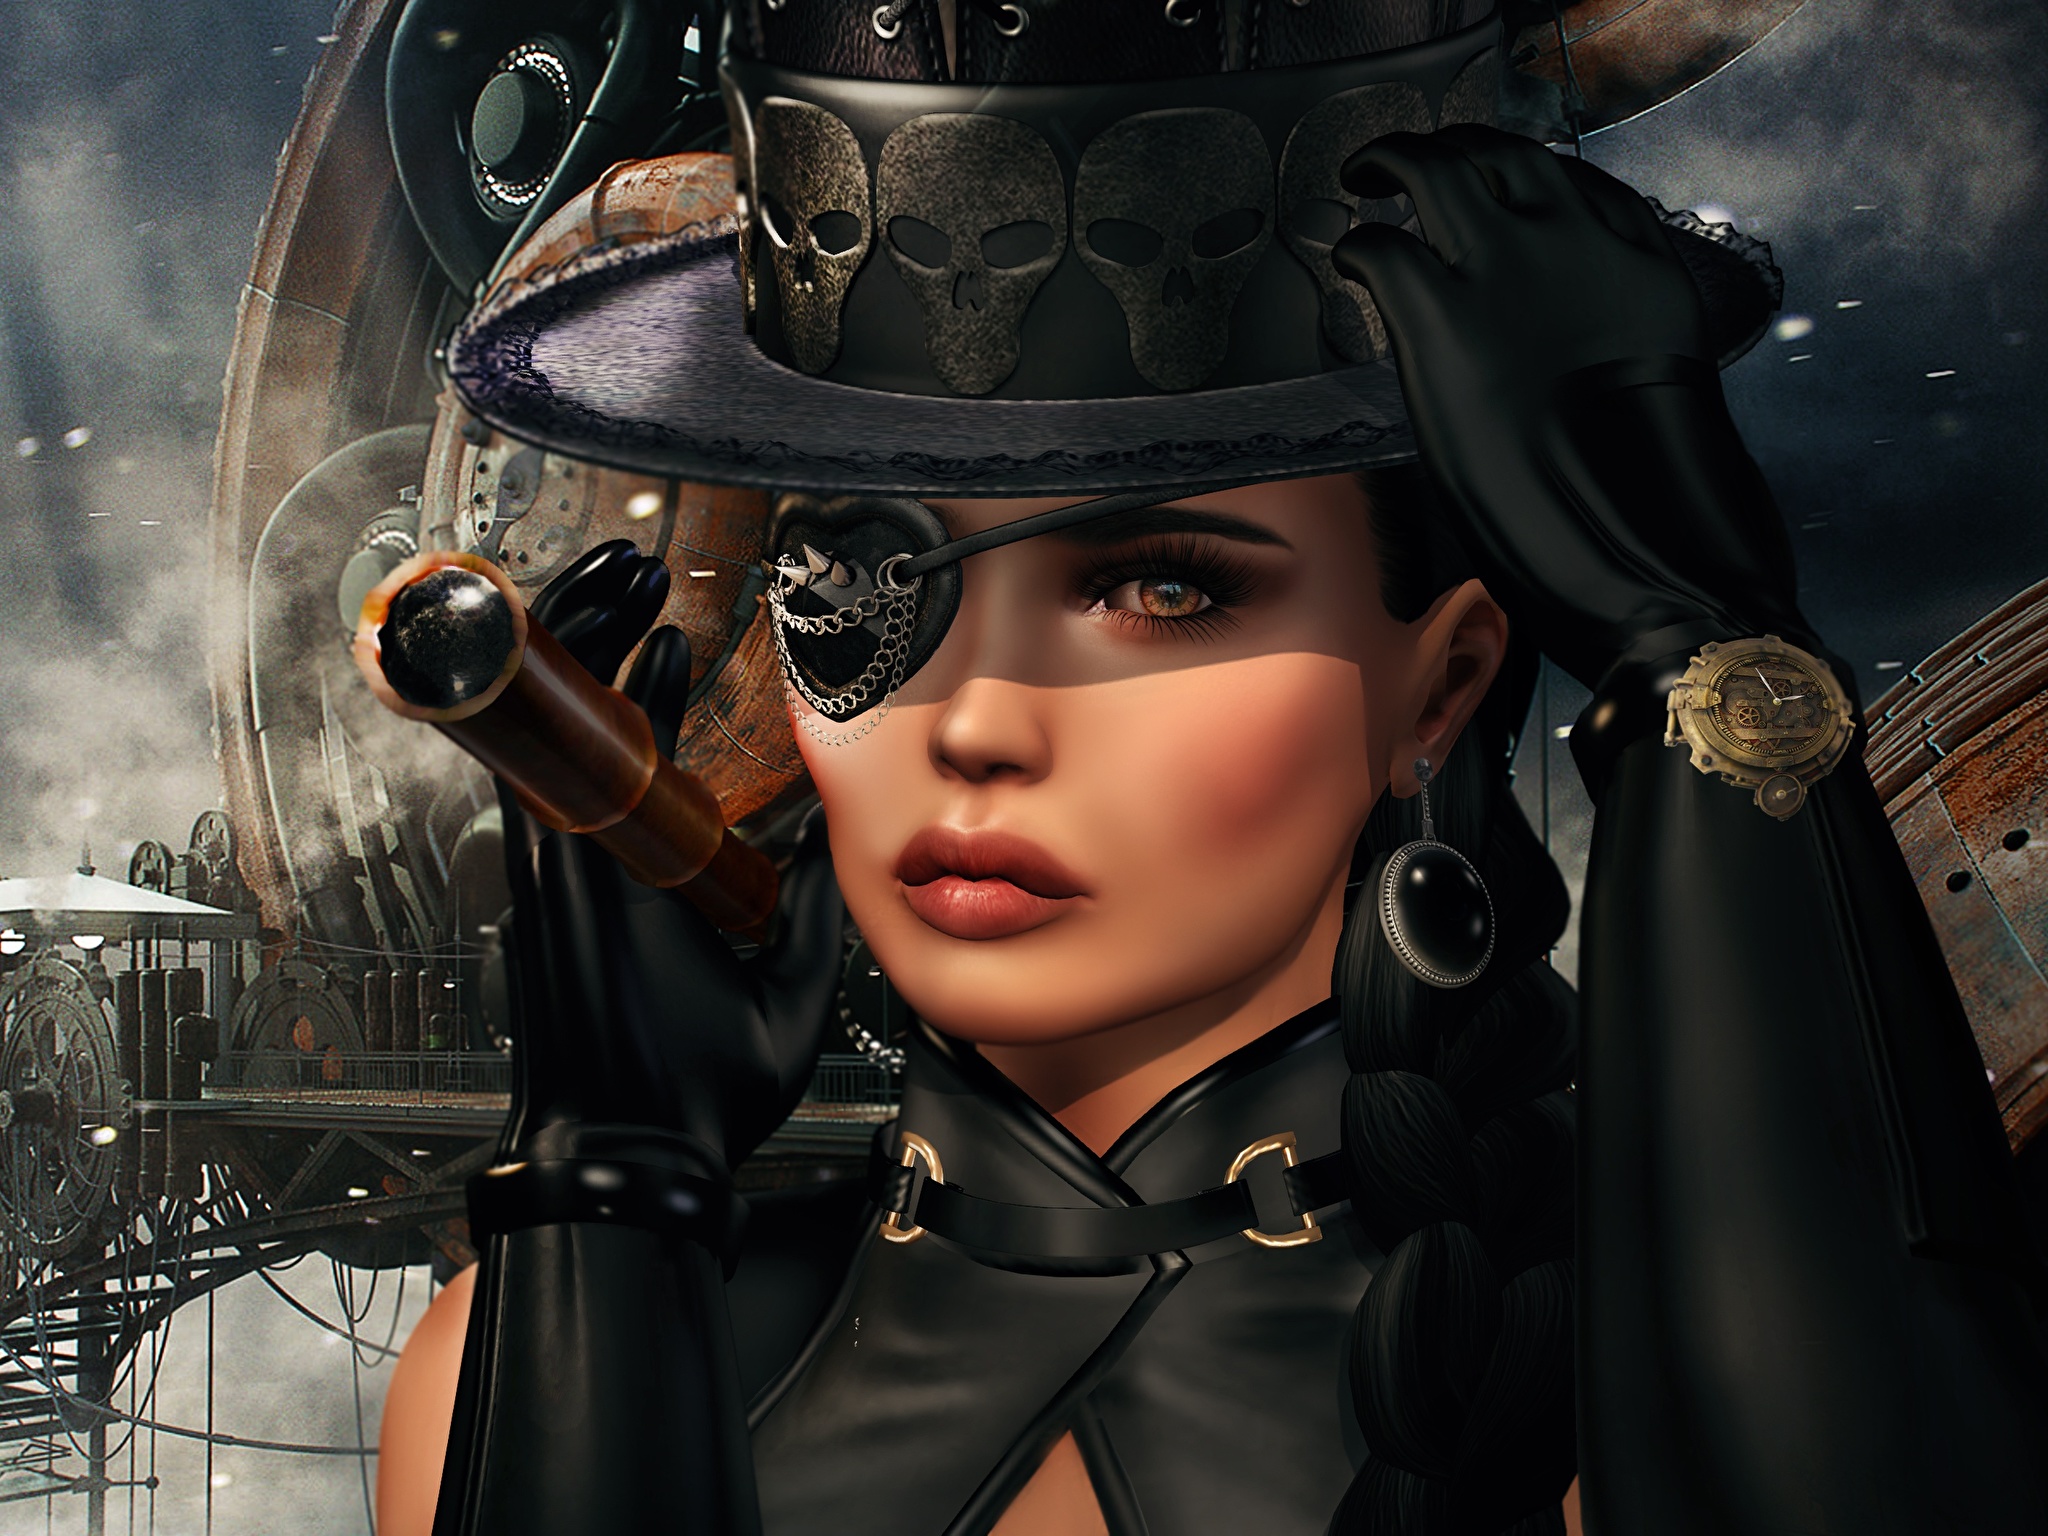 Image Steampunk Hat Eye patch 518597 2048x1536 in Ba567's images album...